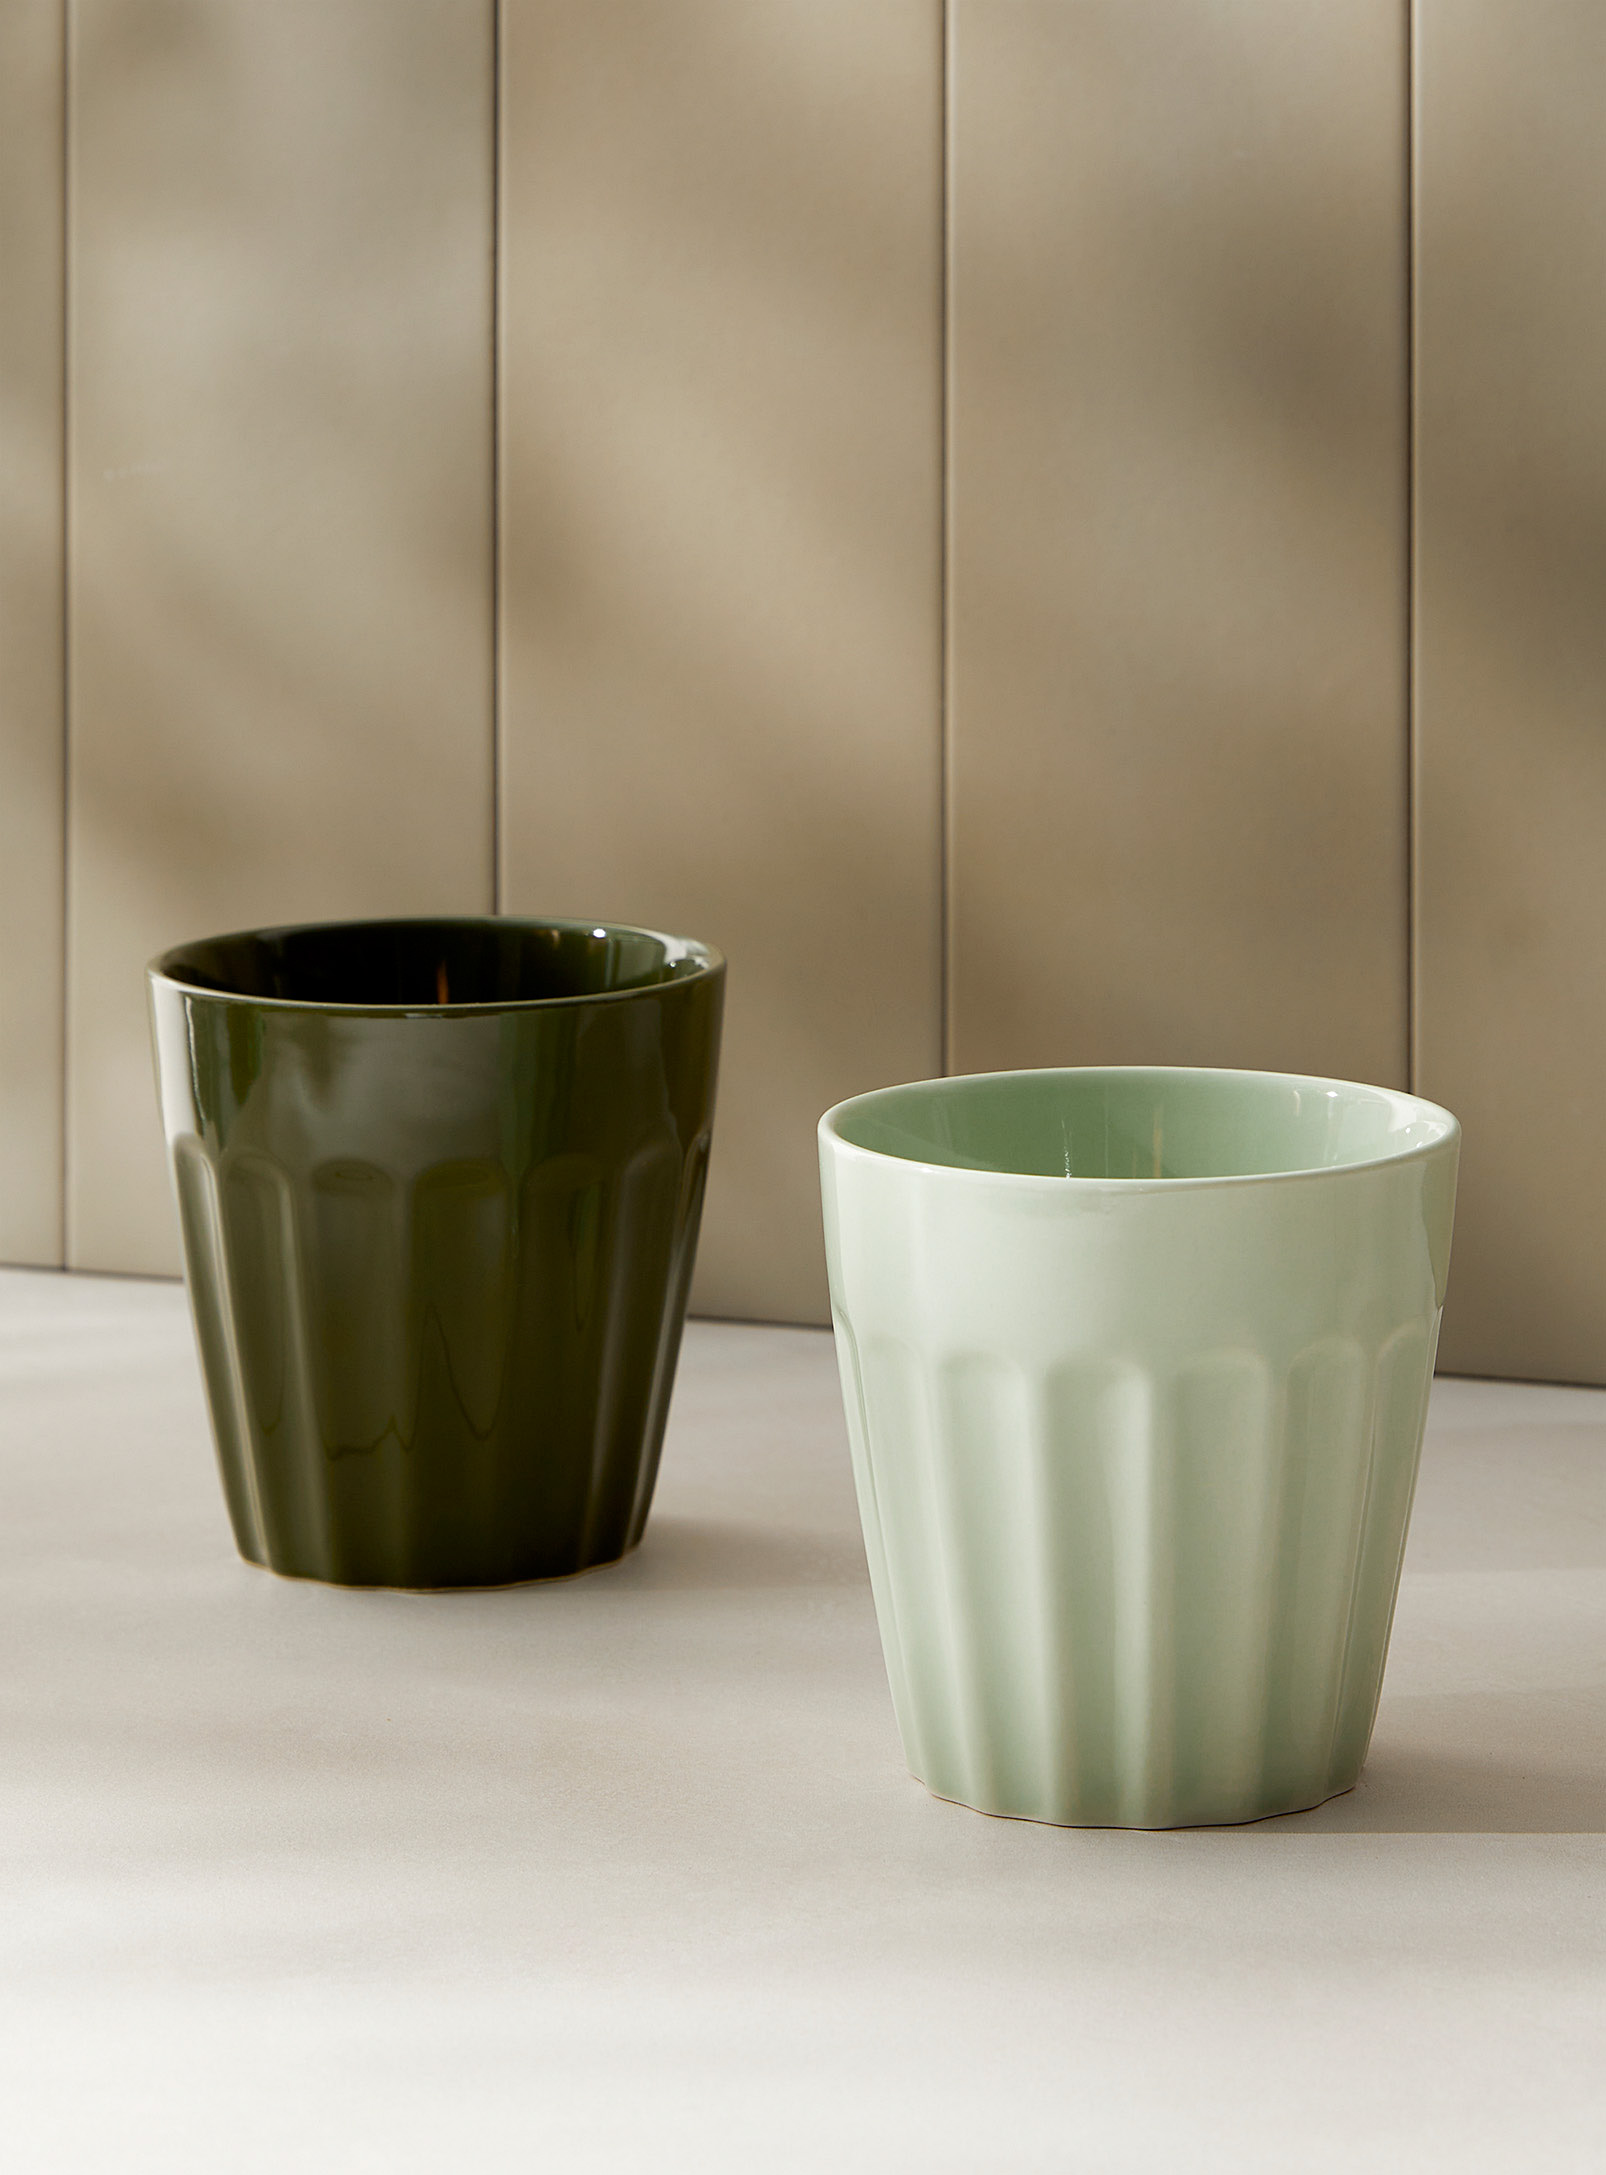 Simons Maison Natural Tones Coffee Cups Set Of 2 In Green